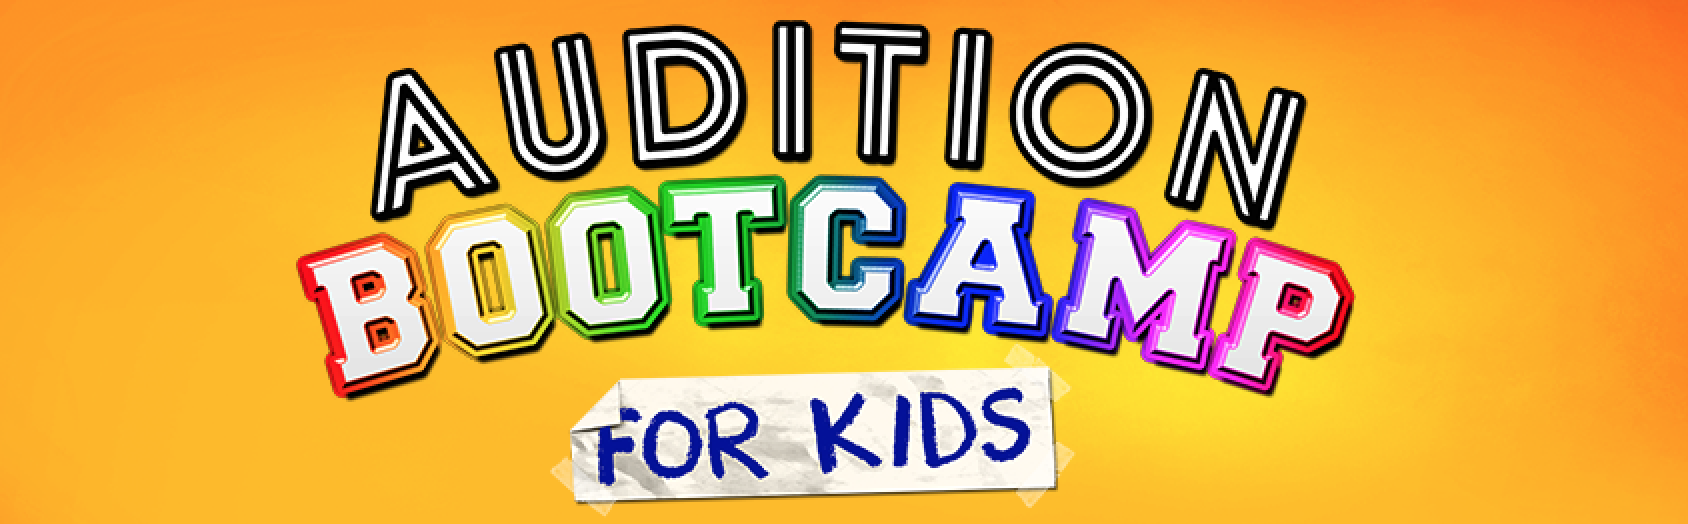 Audition Bootcamp for Kids